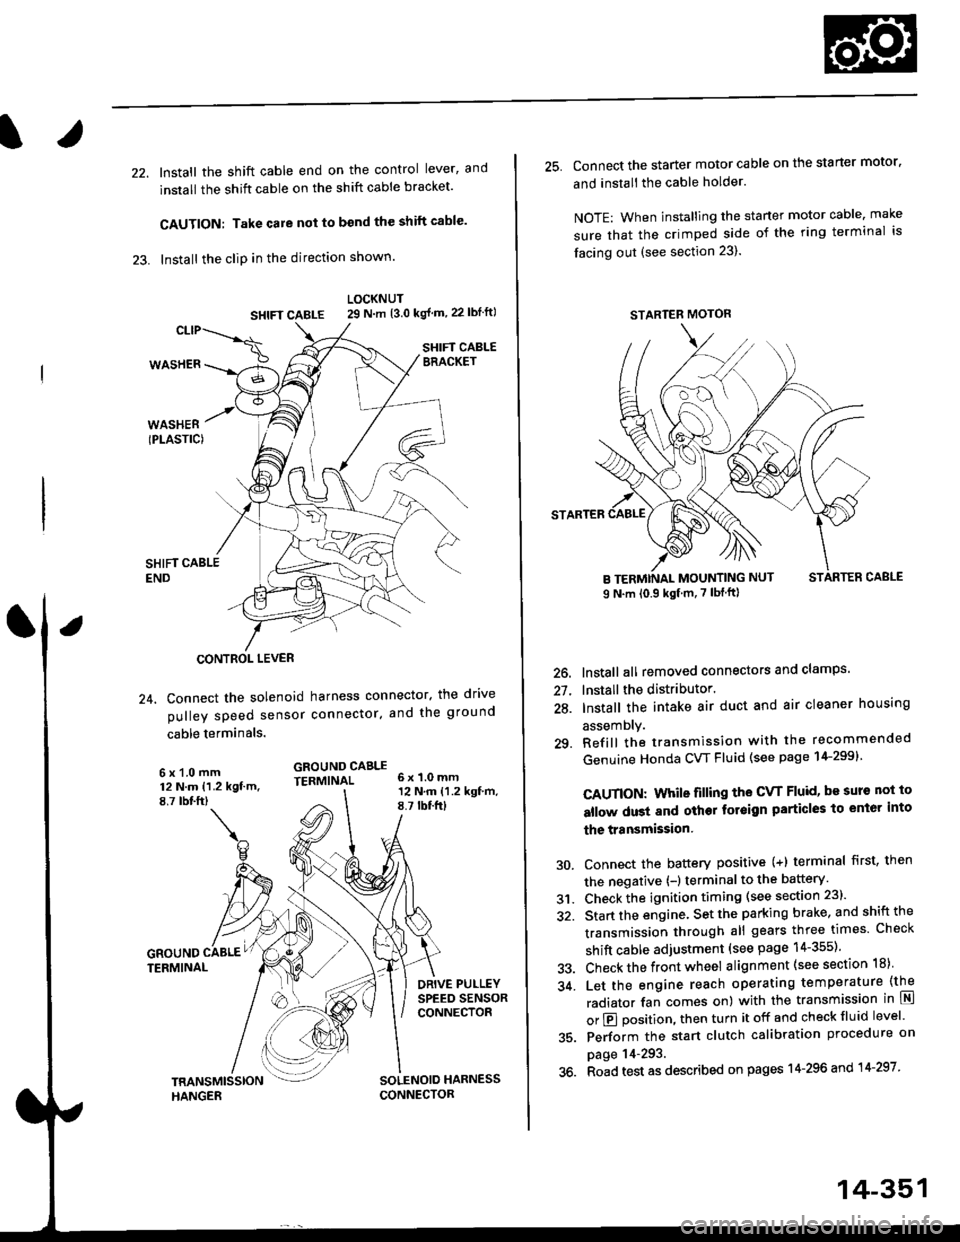 HONDA CIVIC 1996 6.G Owners Manual 22. Install the shift cable end on the control lever, and
install the shift cable on the shift cable bracket
CAUTION: Take care not to bend the shift cable
23. lnstall the clip in the direction show